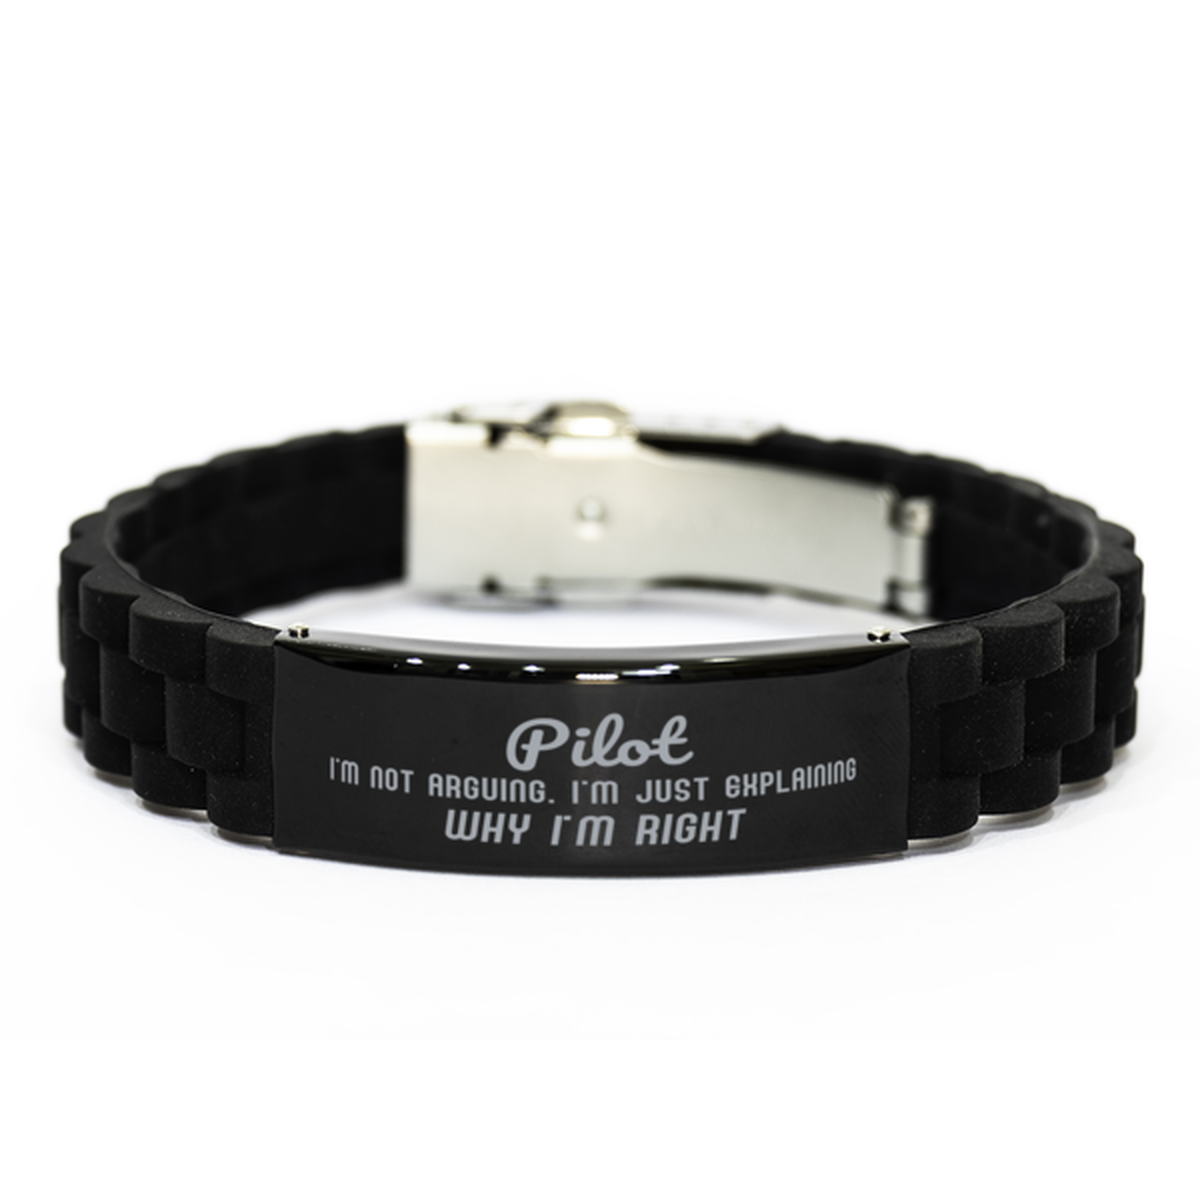 Pilot I'm not Arguing. I'm Just Explaining Why I'm RIGHT Black Glidelock Clasp Bracelet, Funny Saying Quote Pilot Gifts For Pilot Graduation Birthday Christmas Gifts for Men Women Coworker